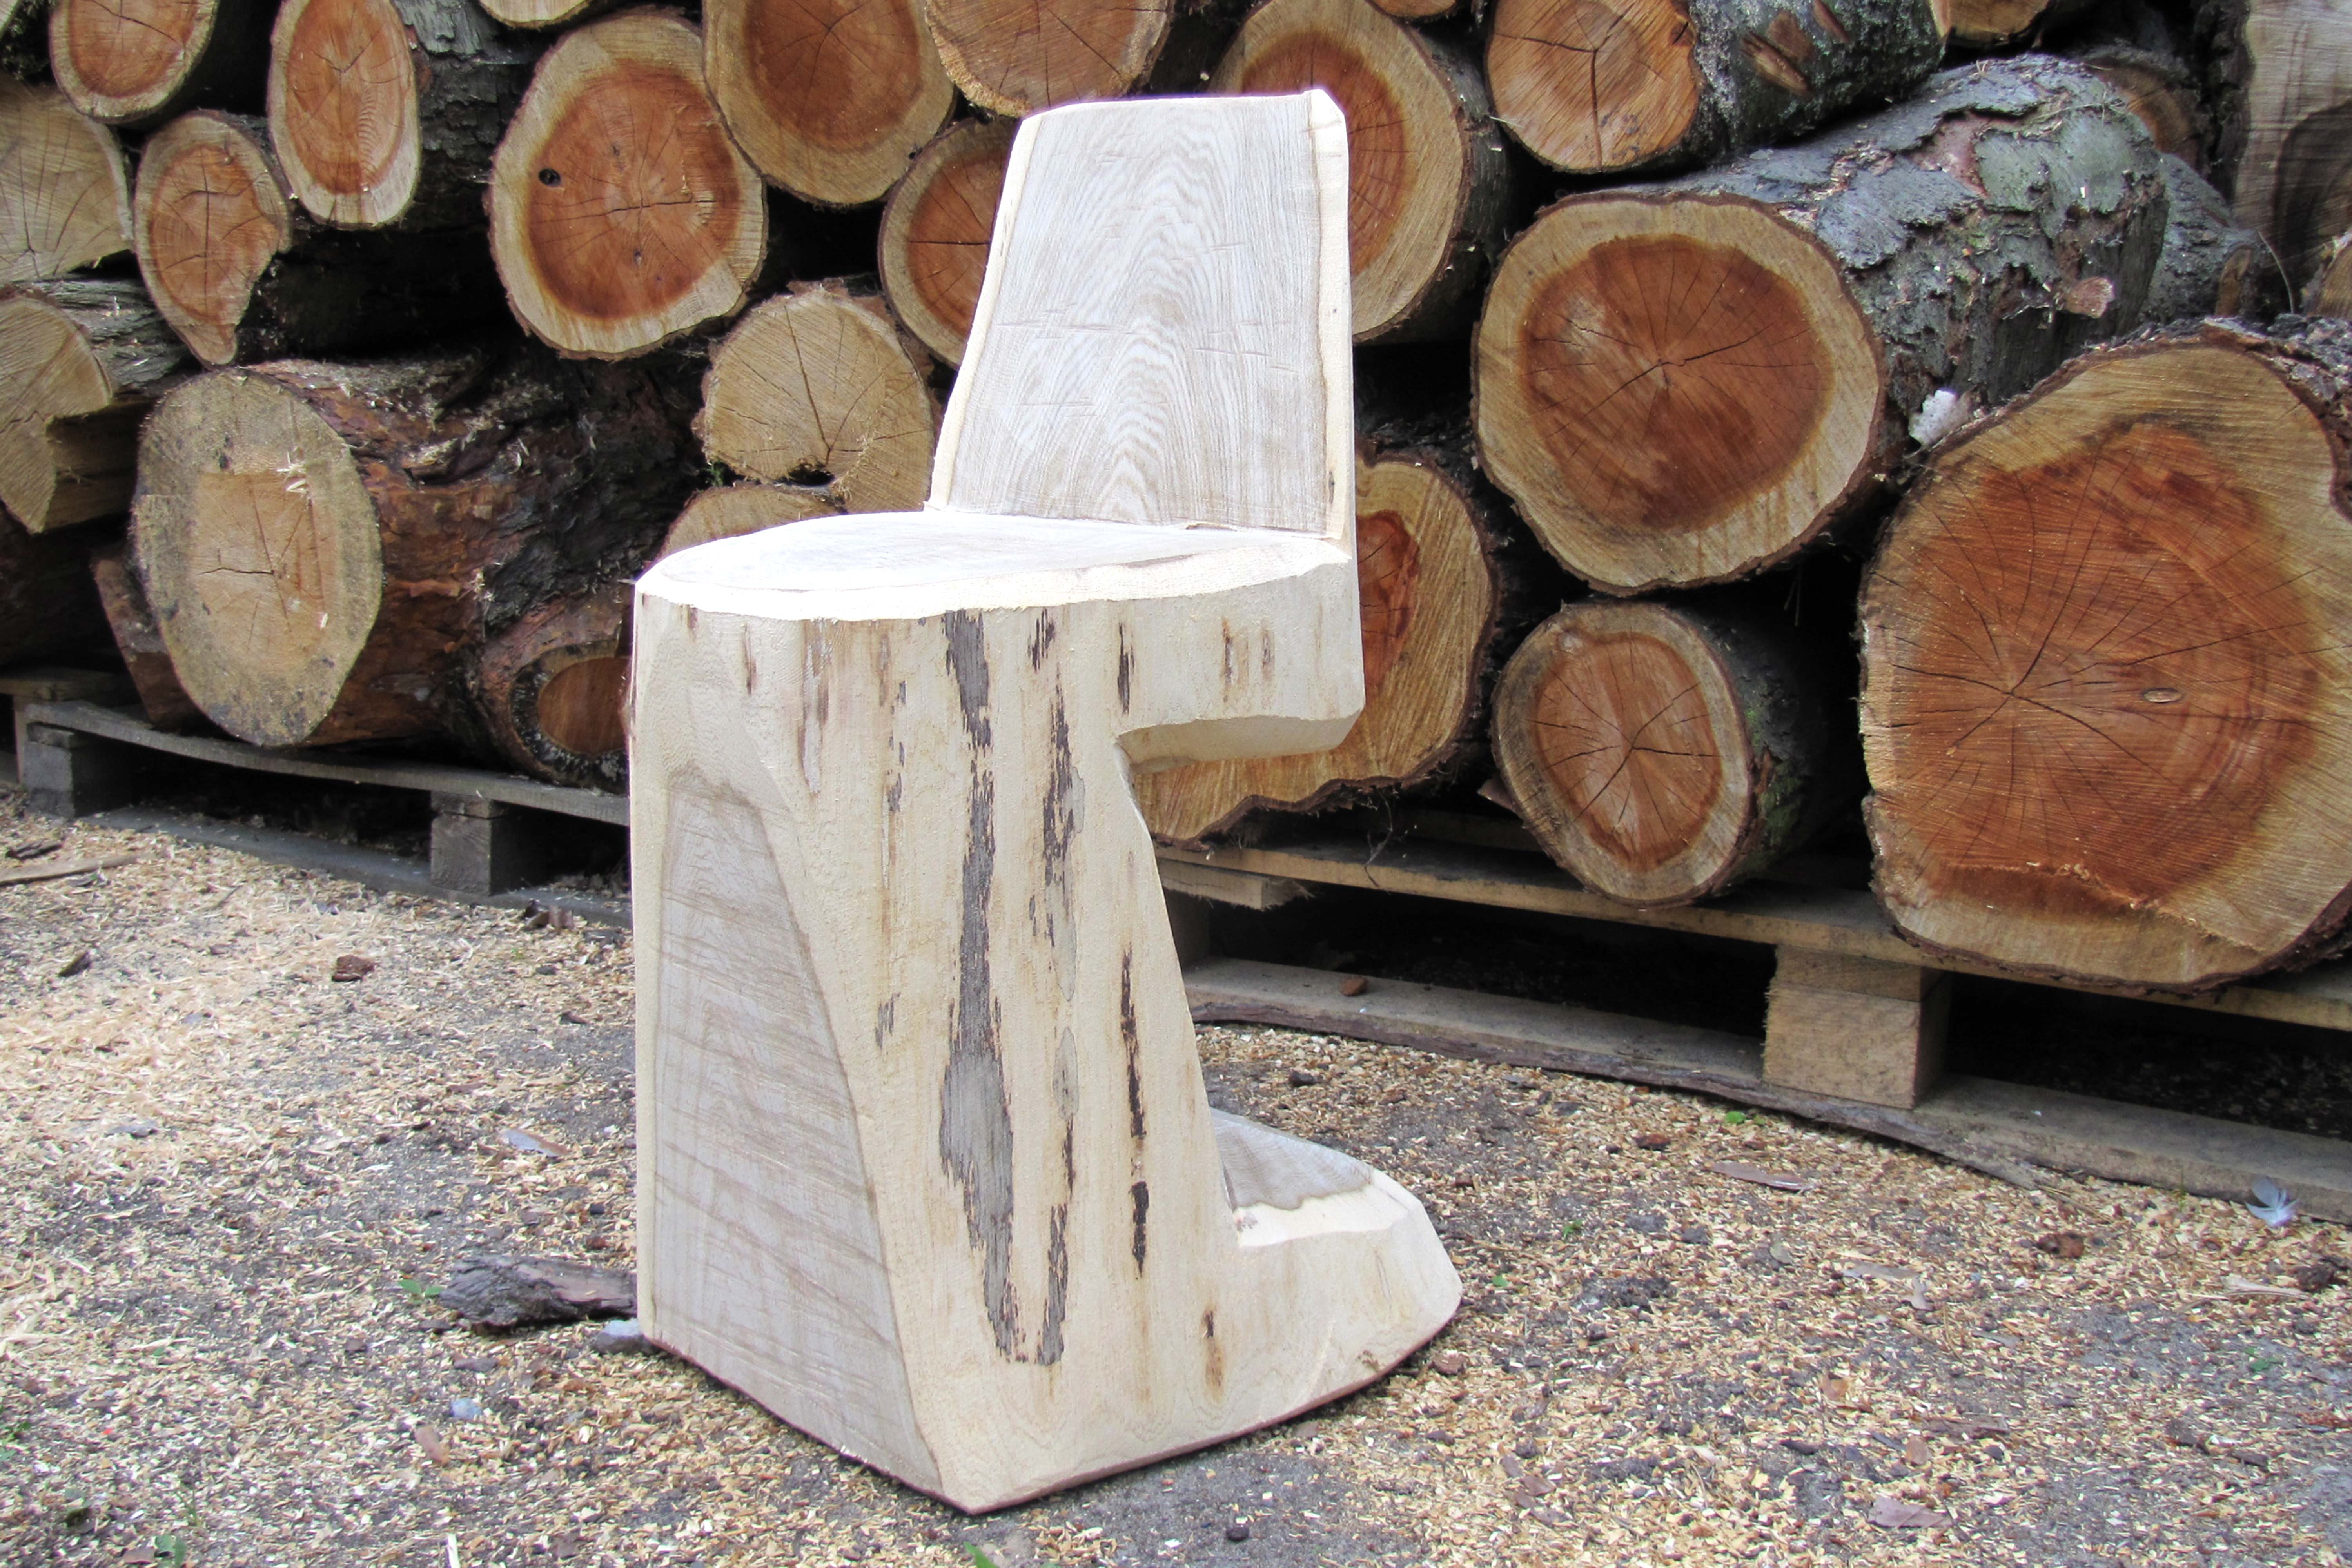 A finished log chair in front of a pile of tree trunks